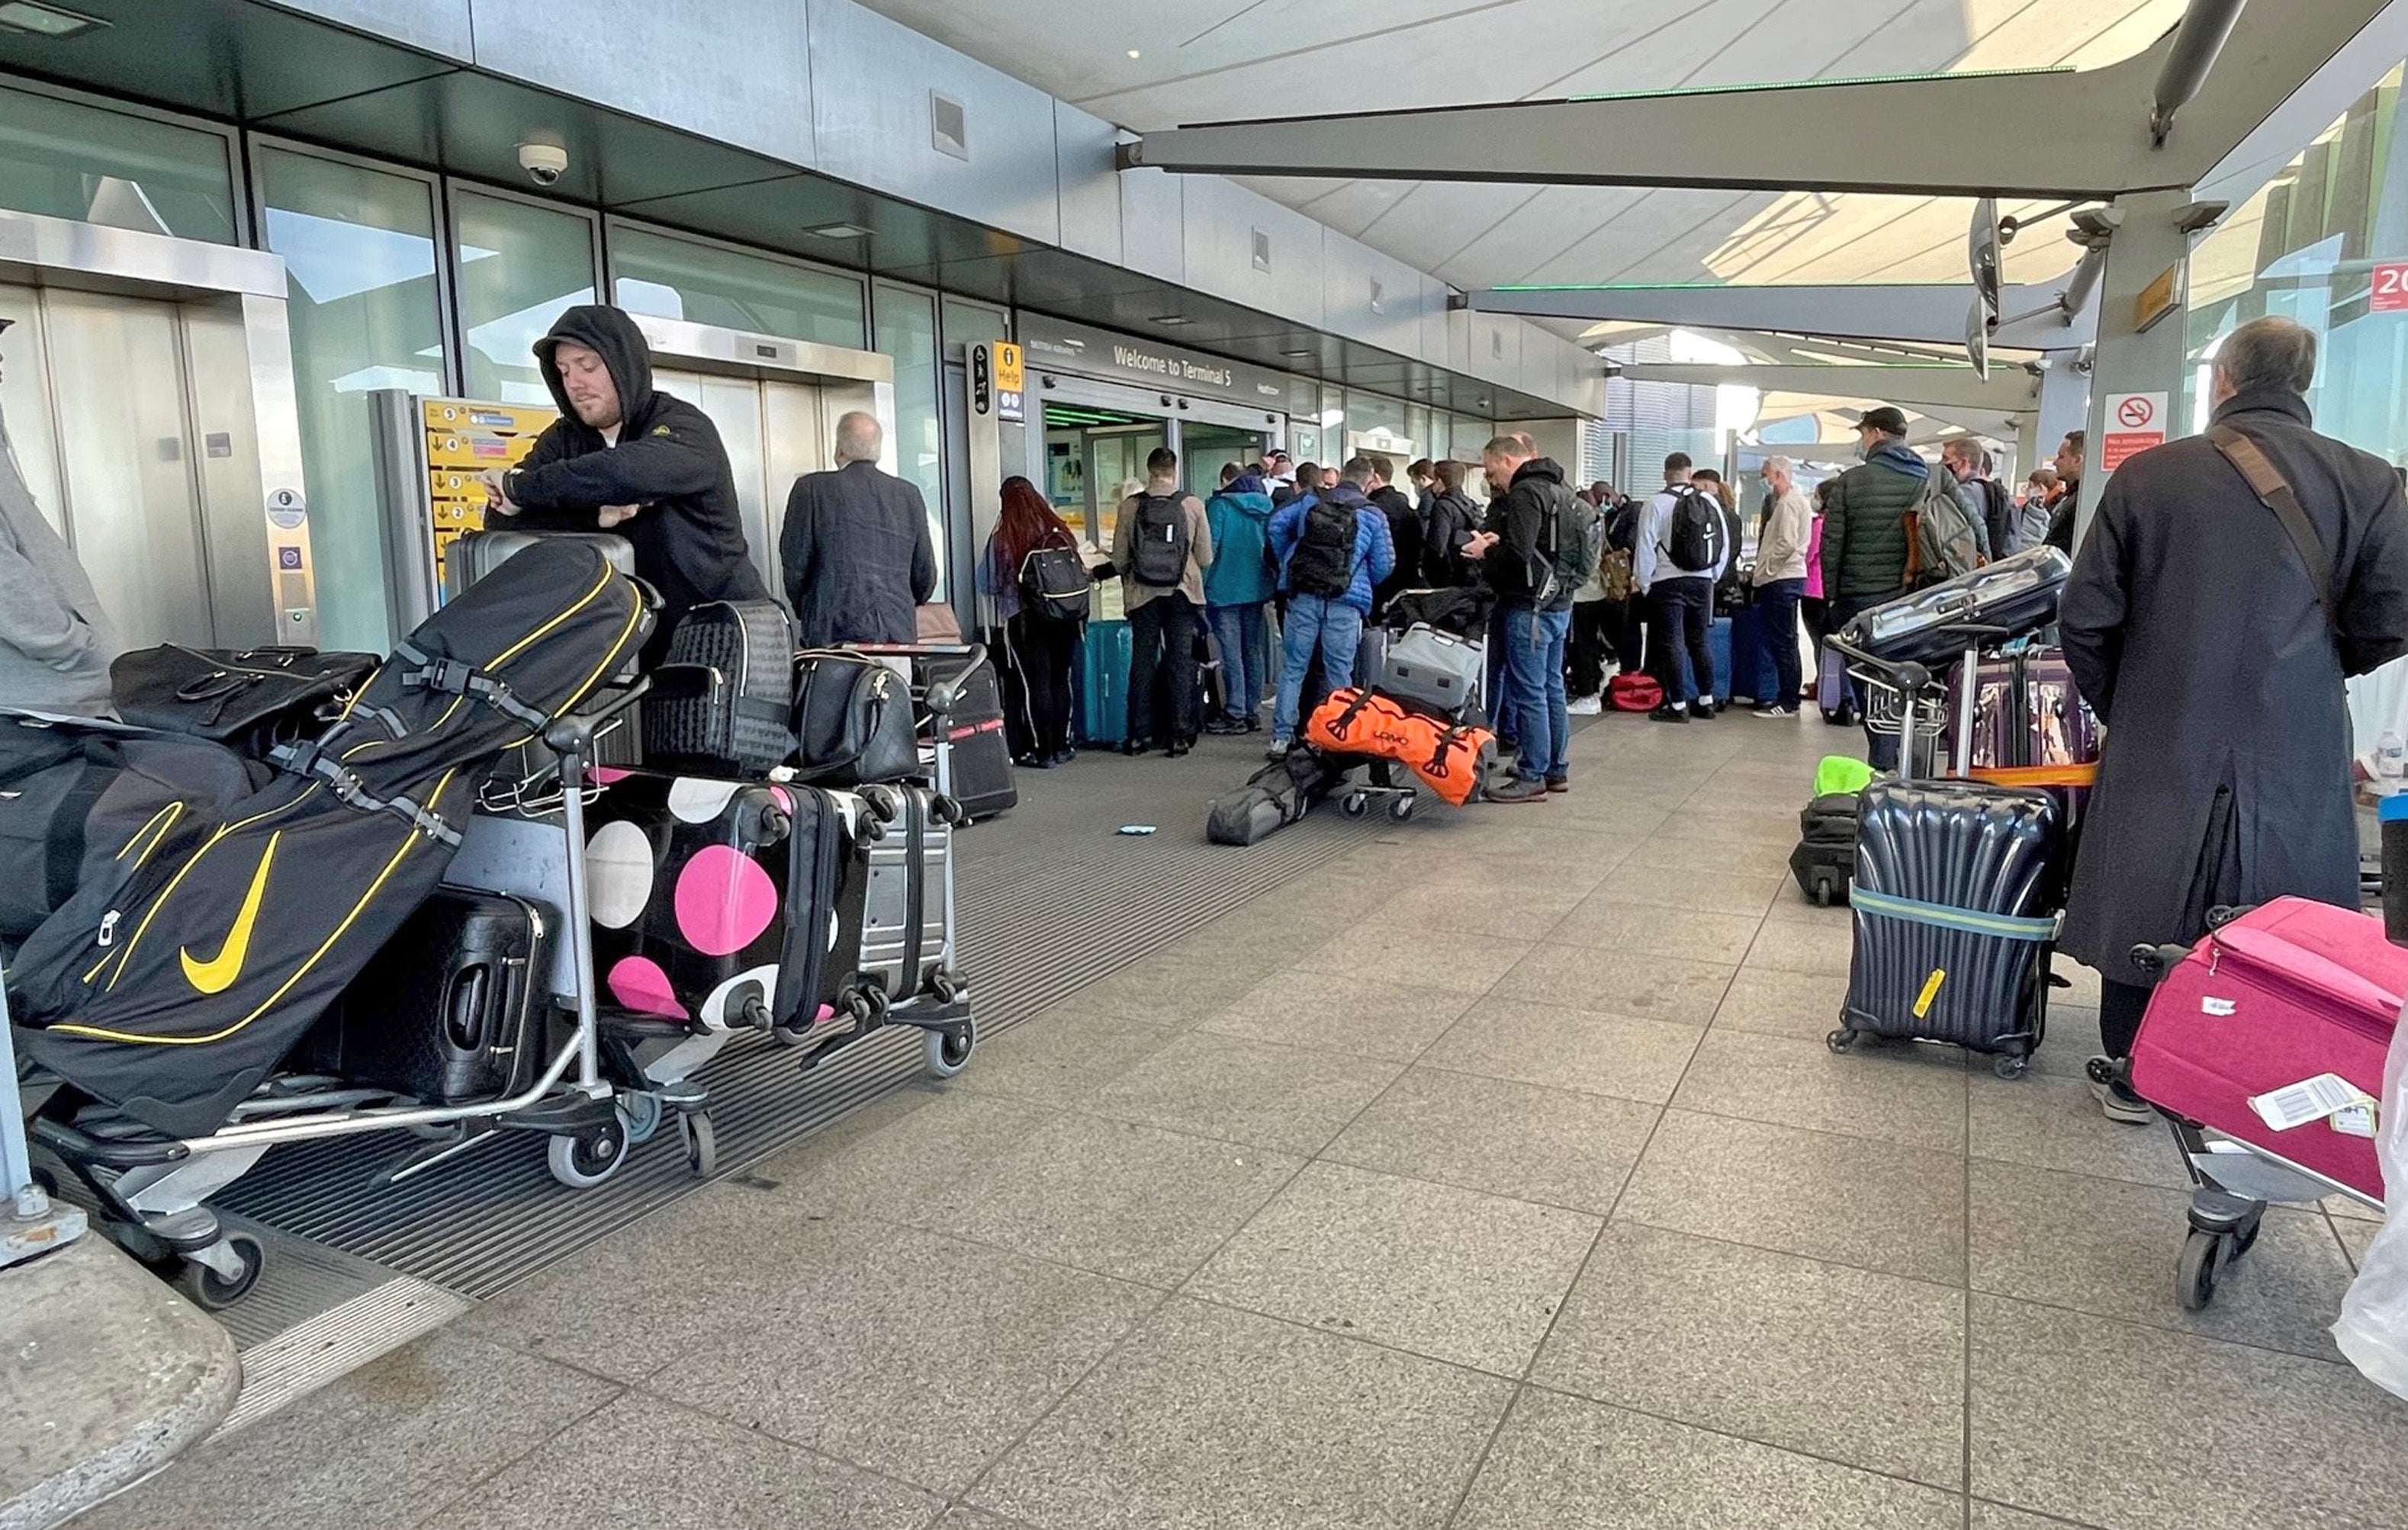 Passengers queue at the Arrivals entrance of Heathrow Airport T5